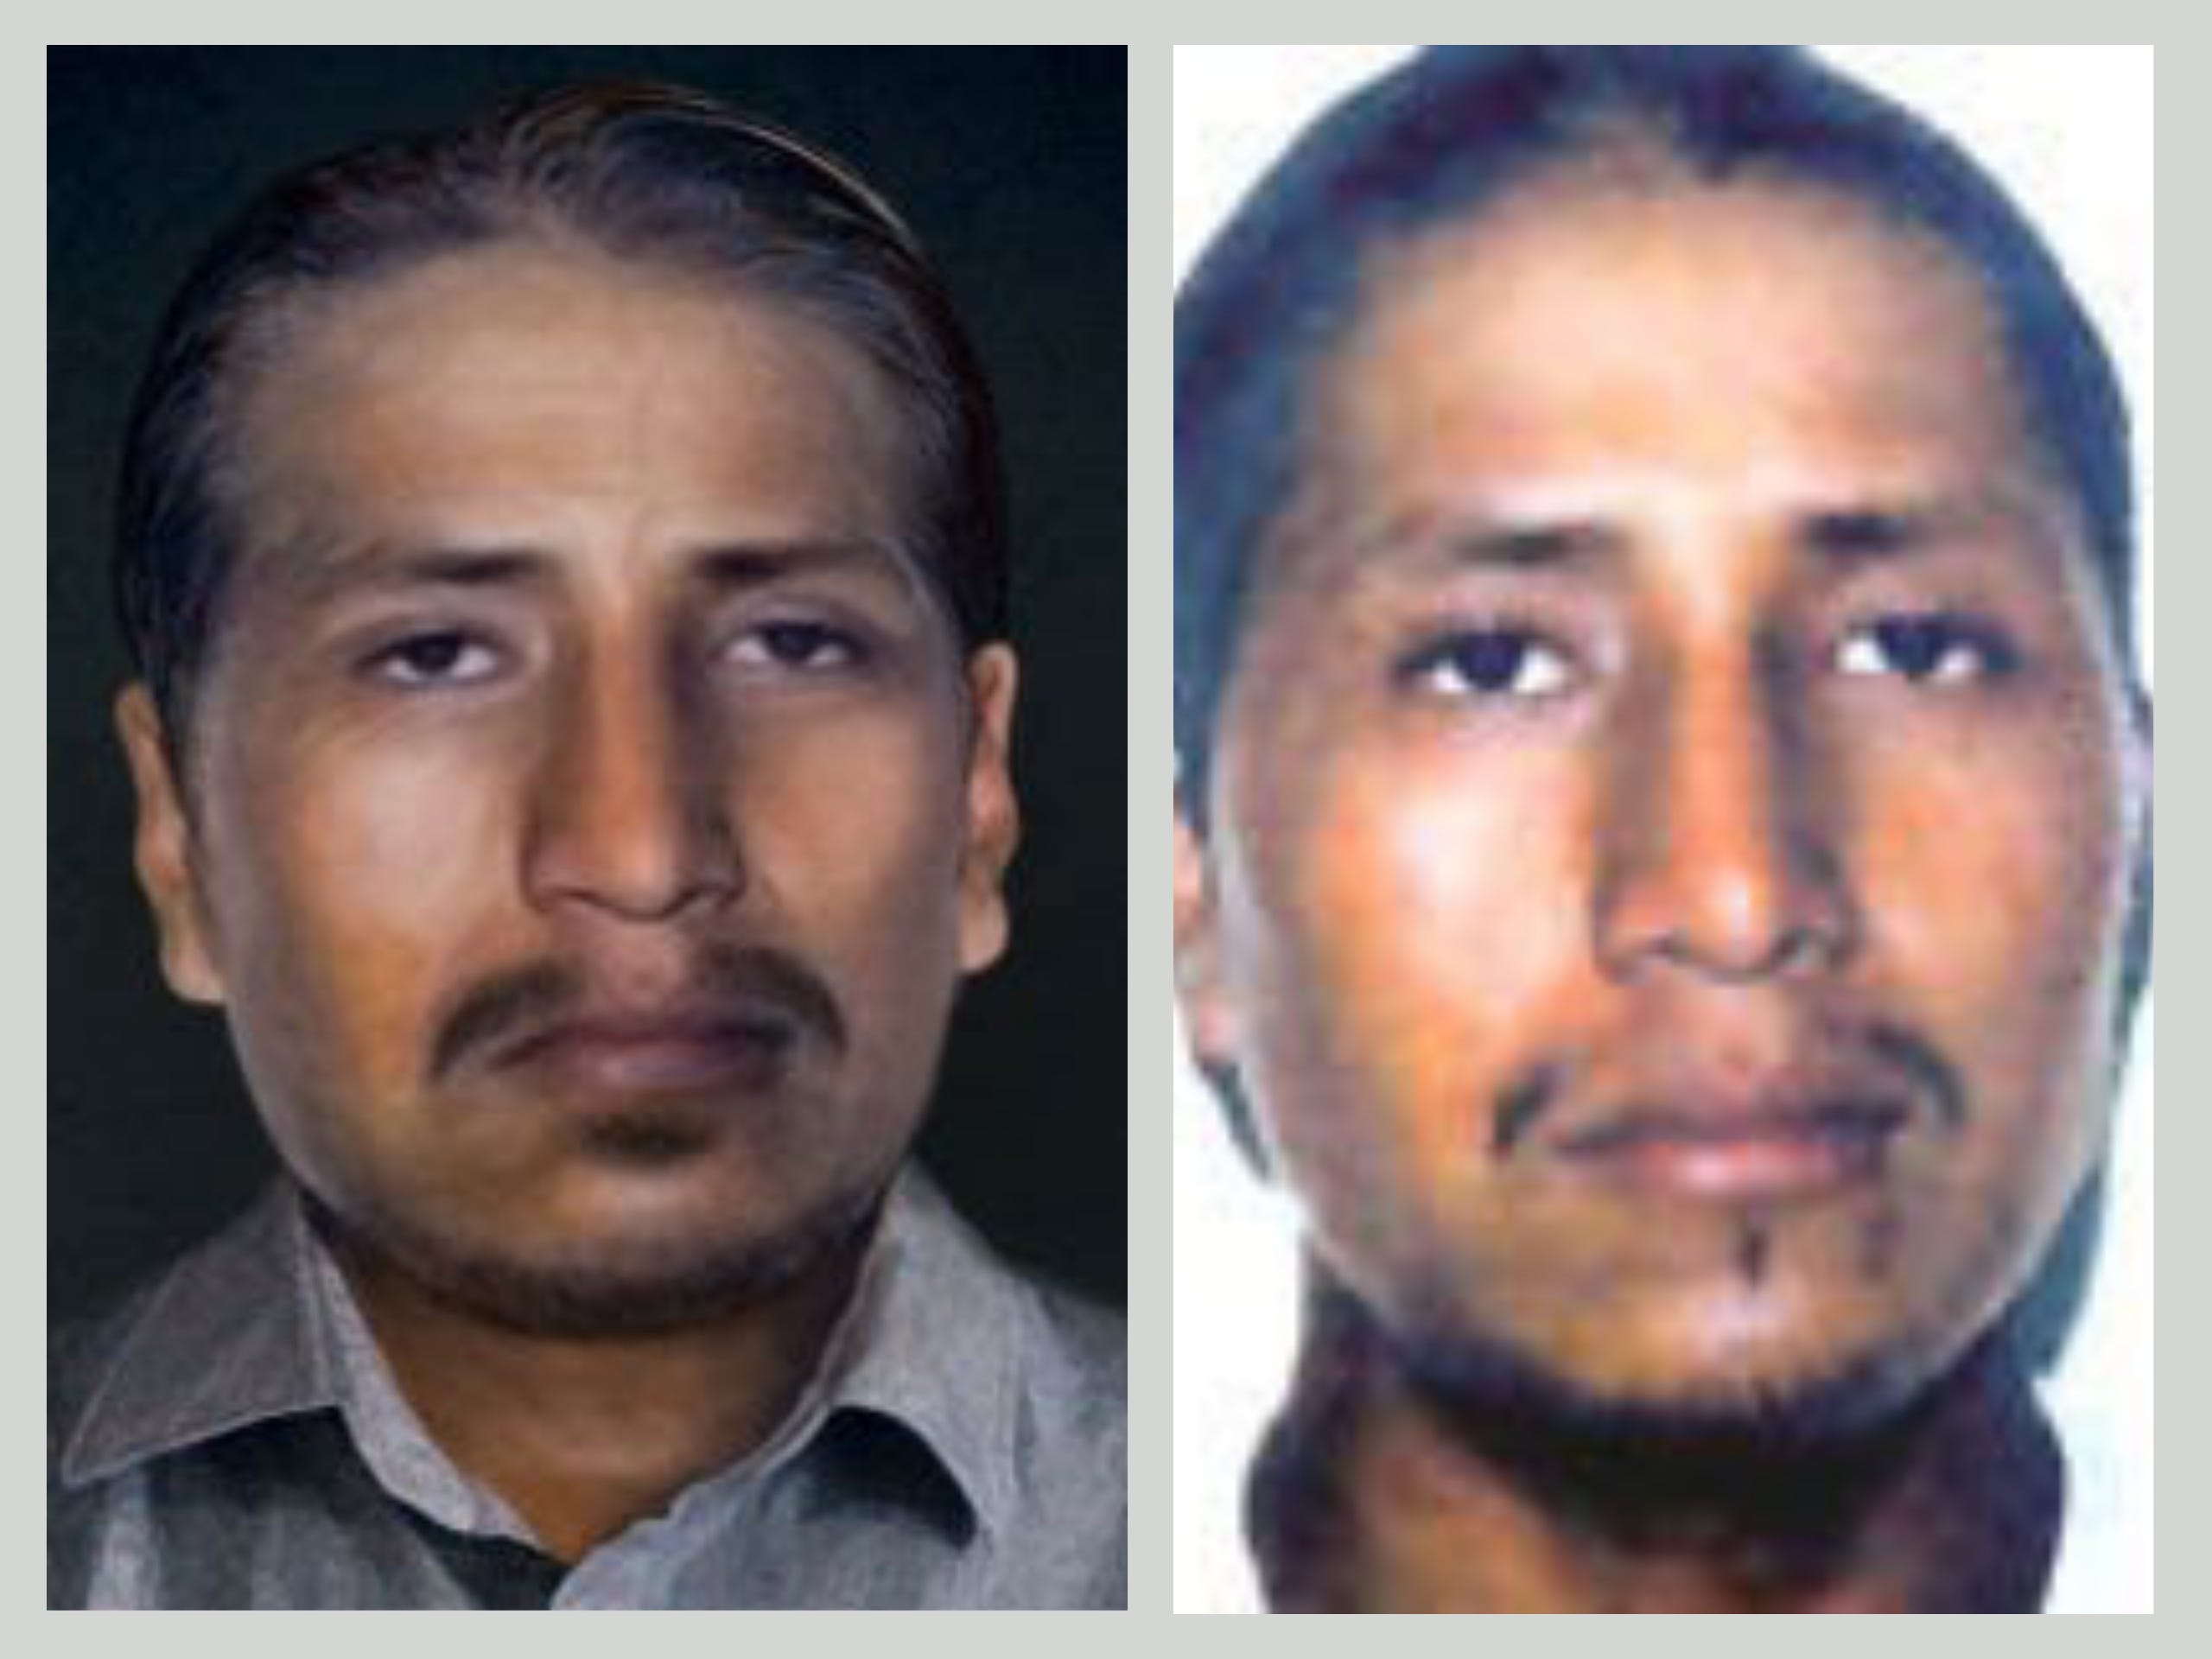 Felipe Santos in age advanced images and before he disappeared in October 2003.